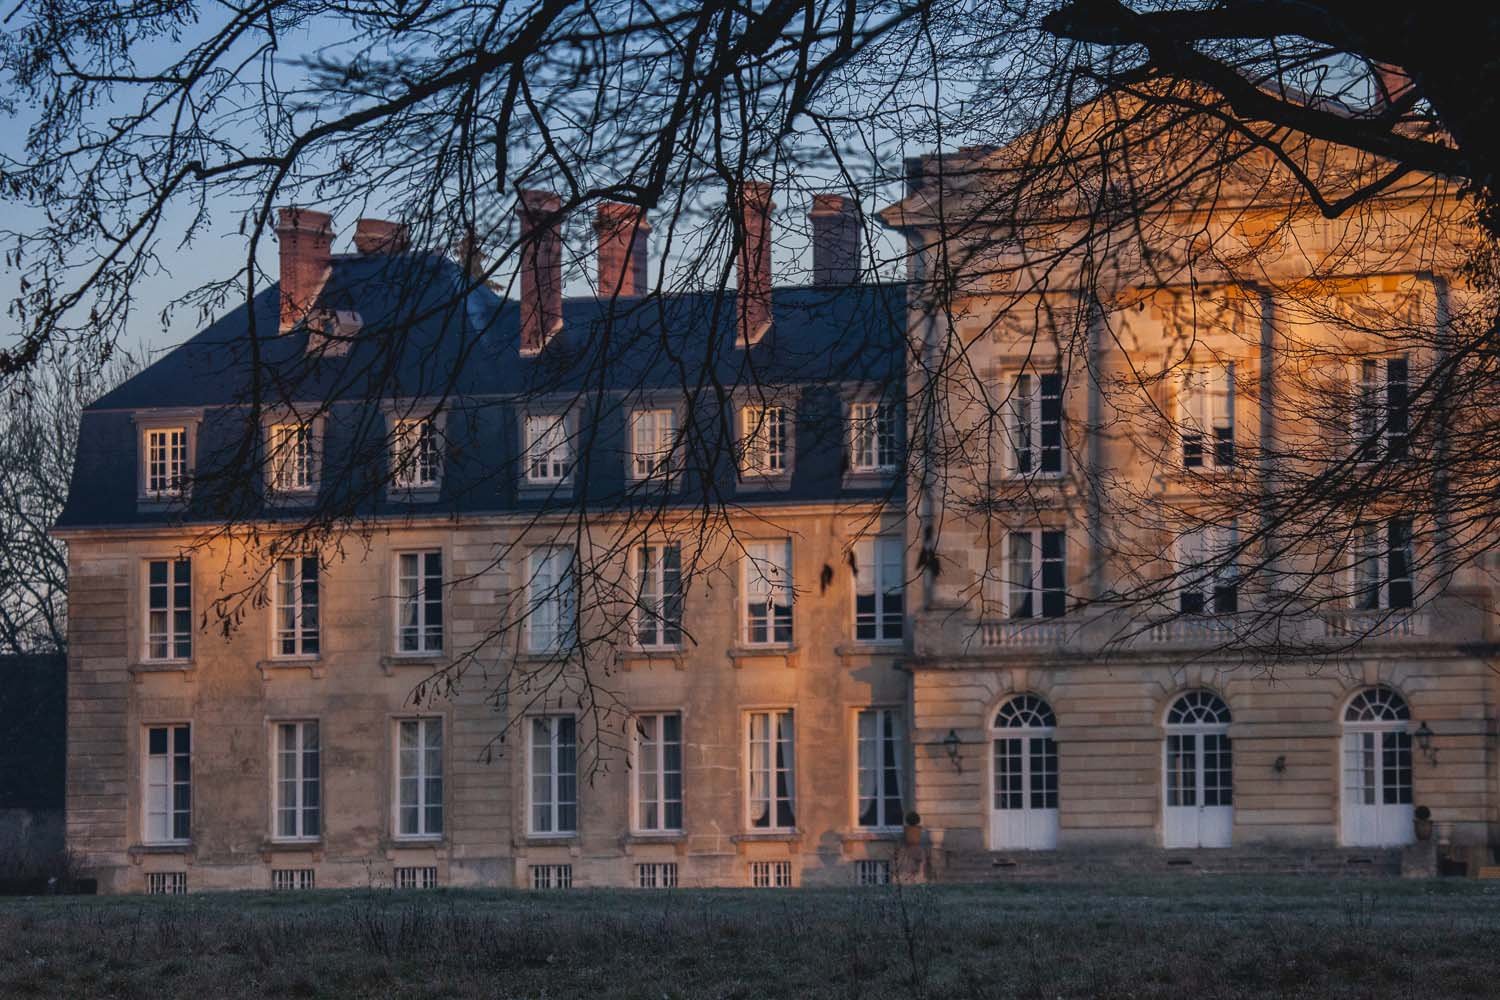 Dusk falls on the honey coloured  facade of Chateau de Courtomer, available to rent for farmily reunions